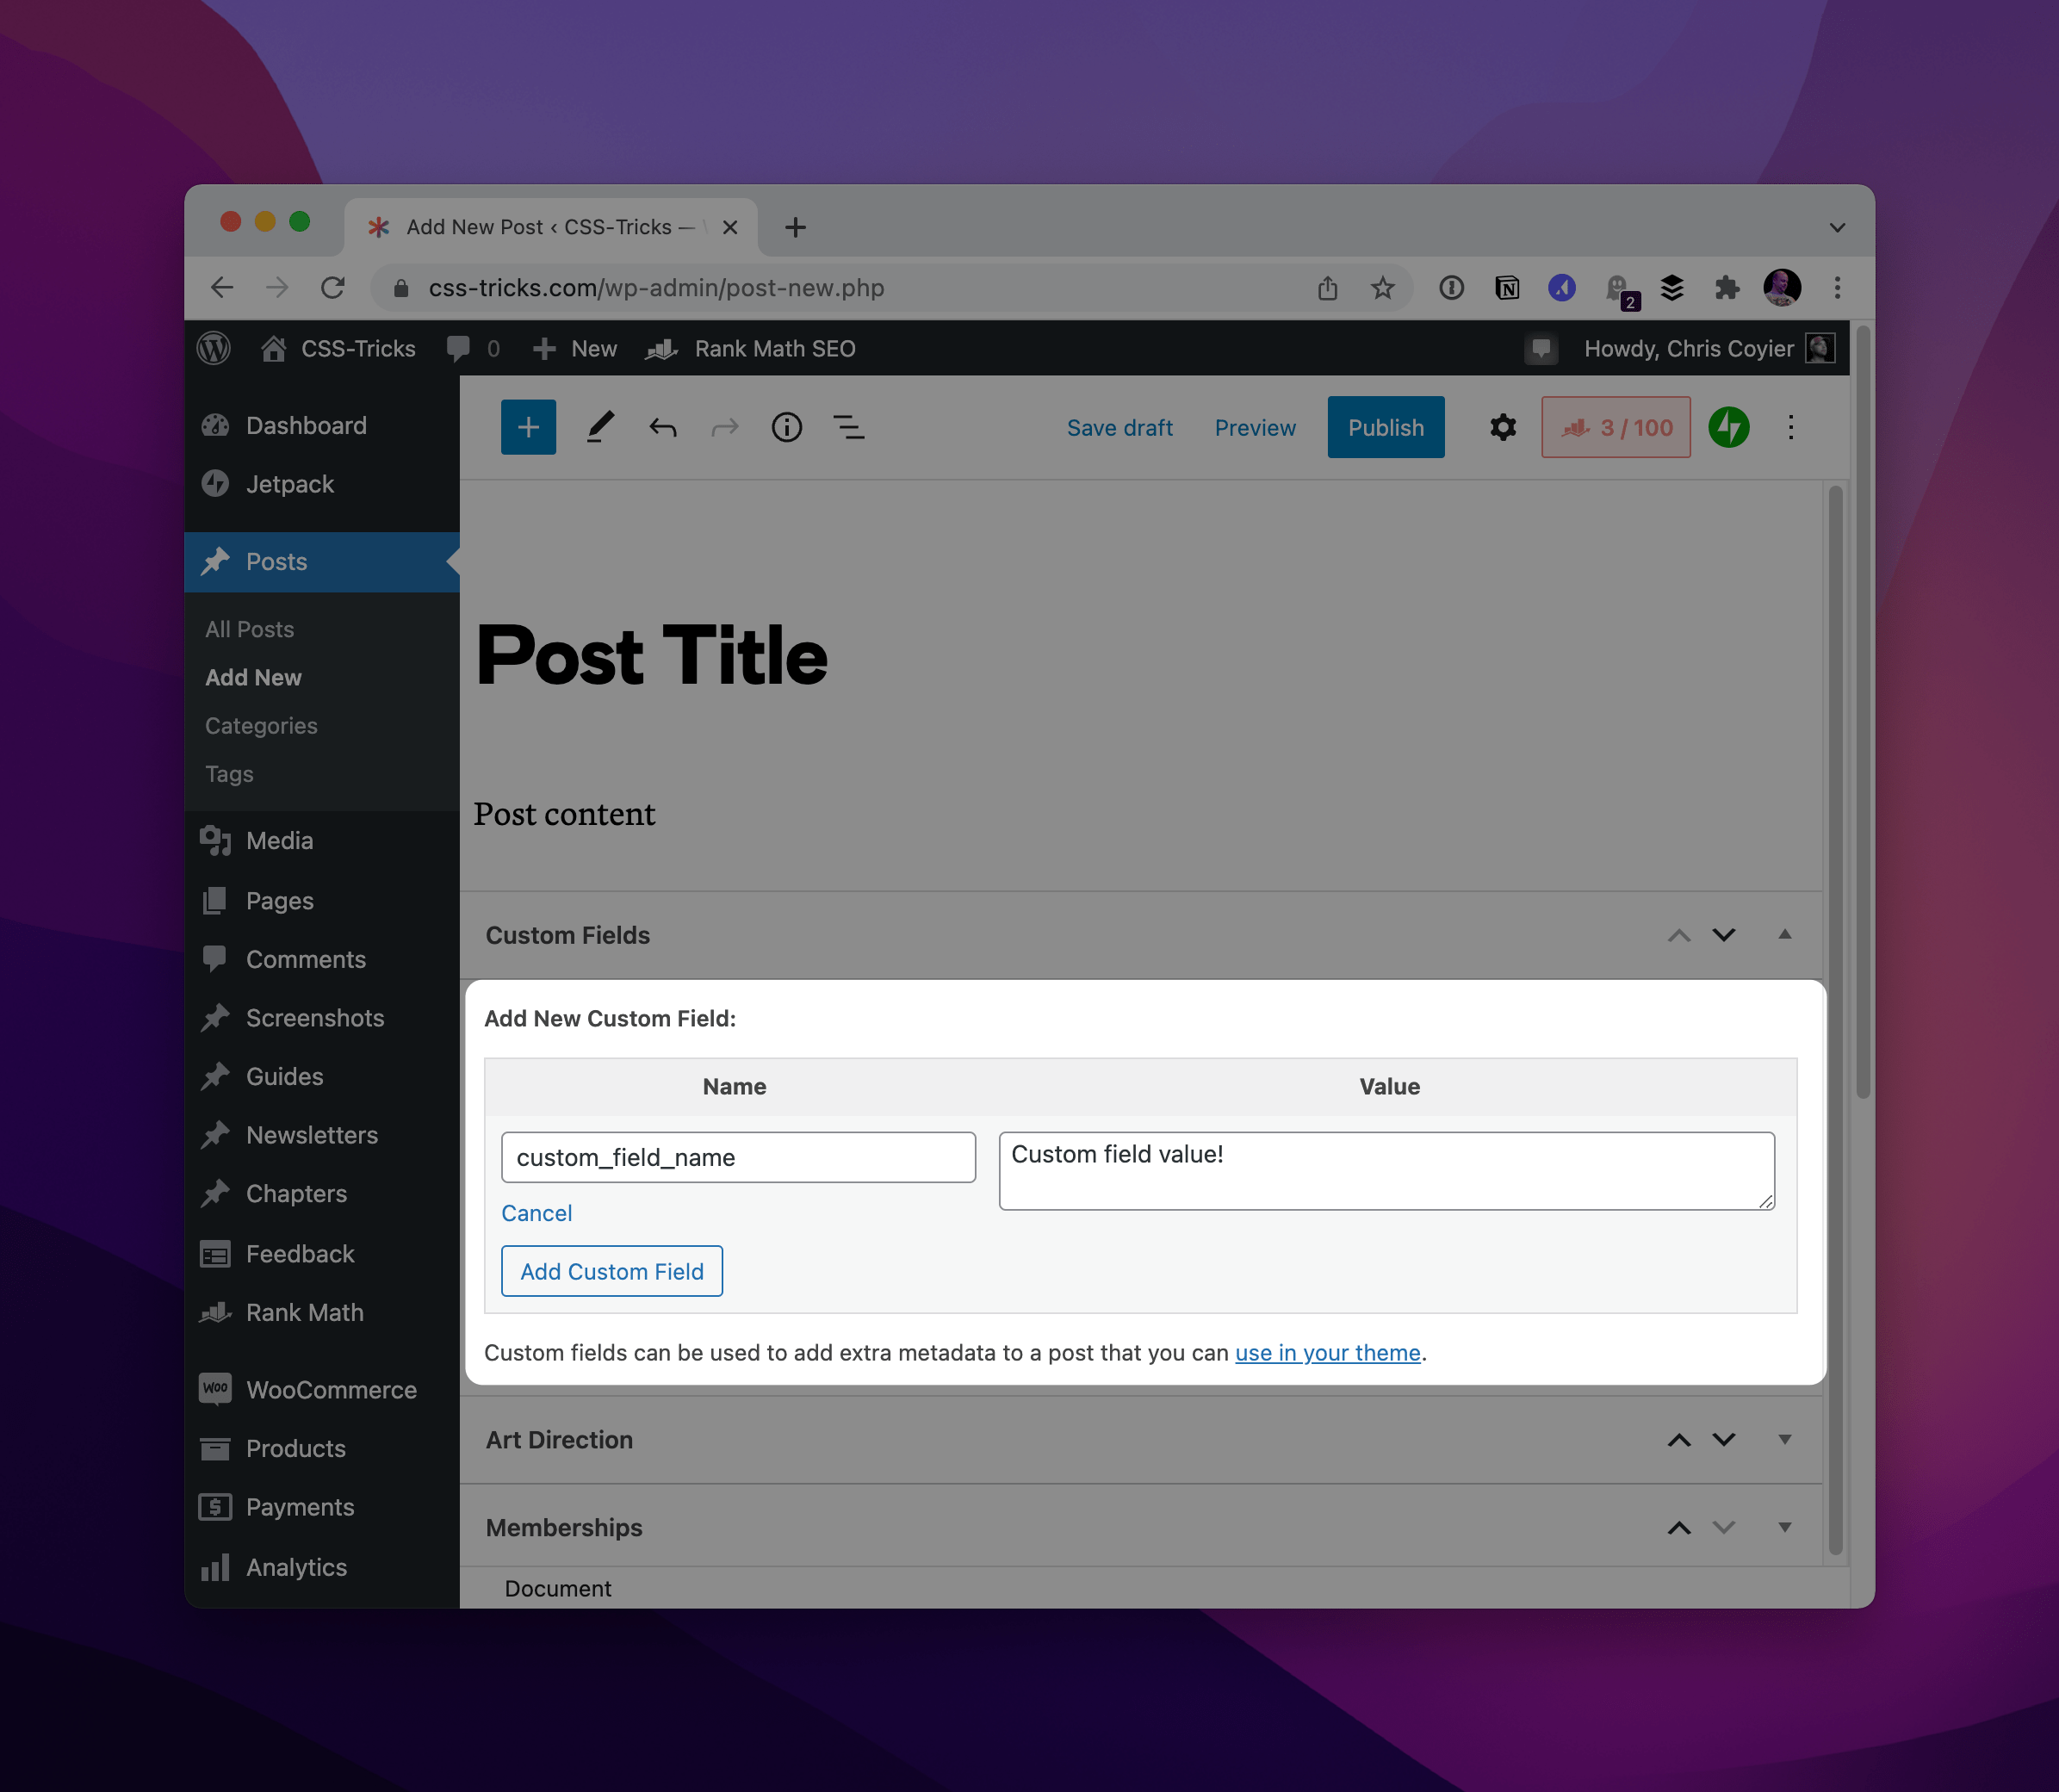 Showing that Custom Fields in WordPress appear below the content area of the block editor in the admin user interface.